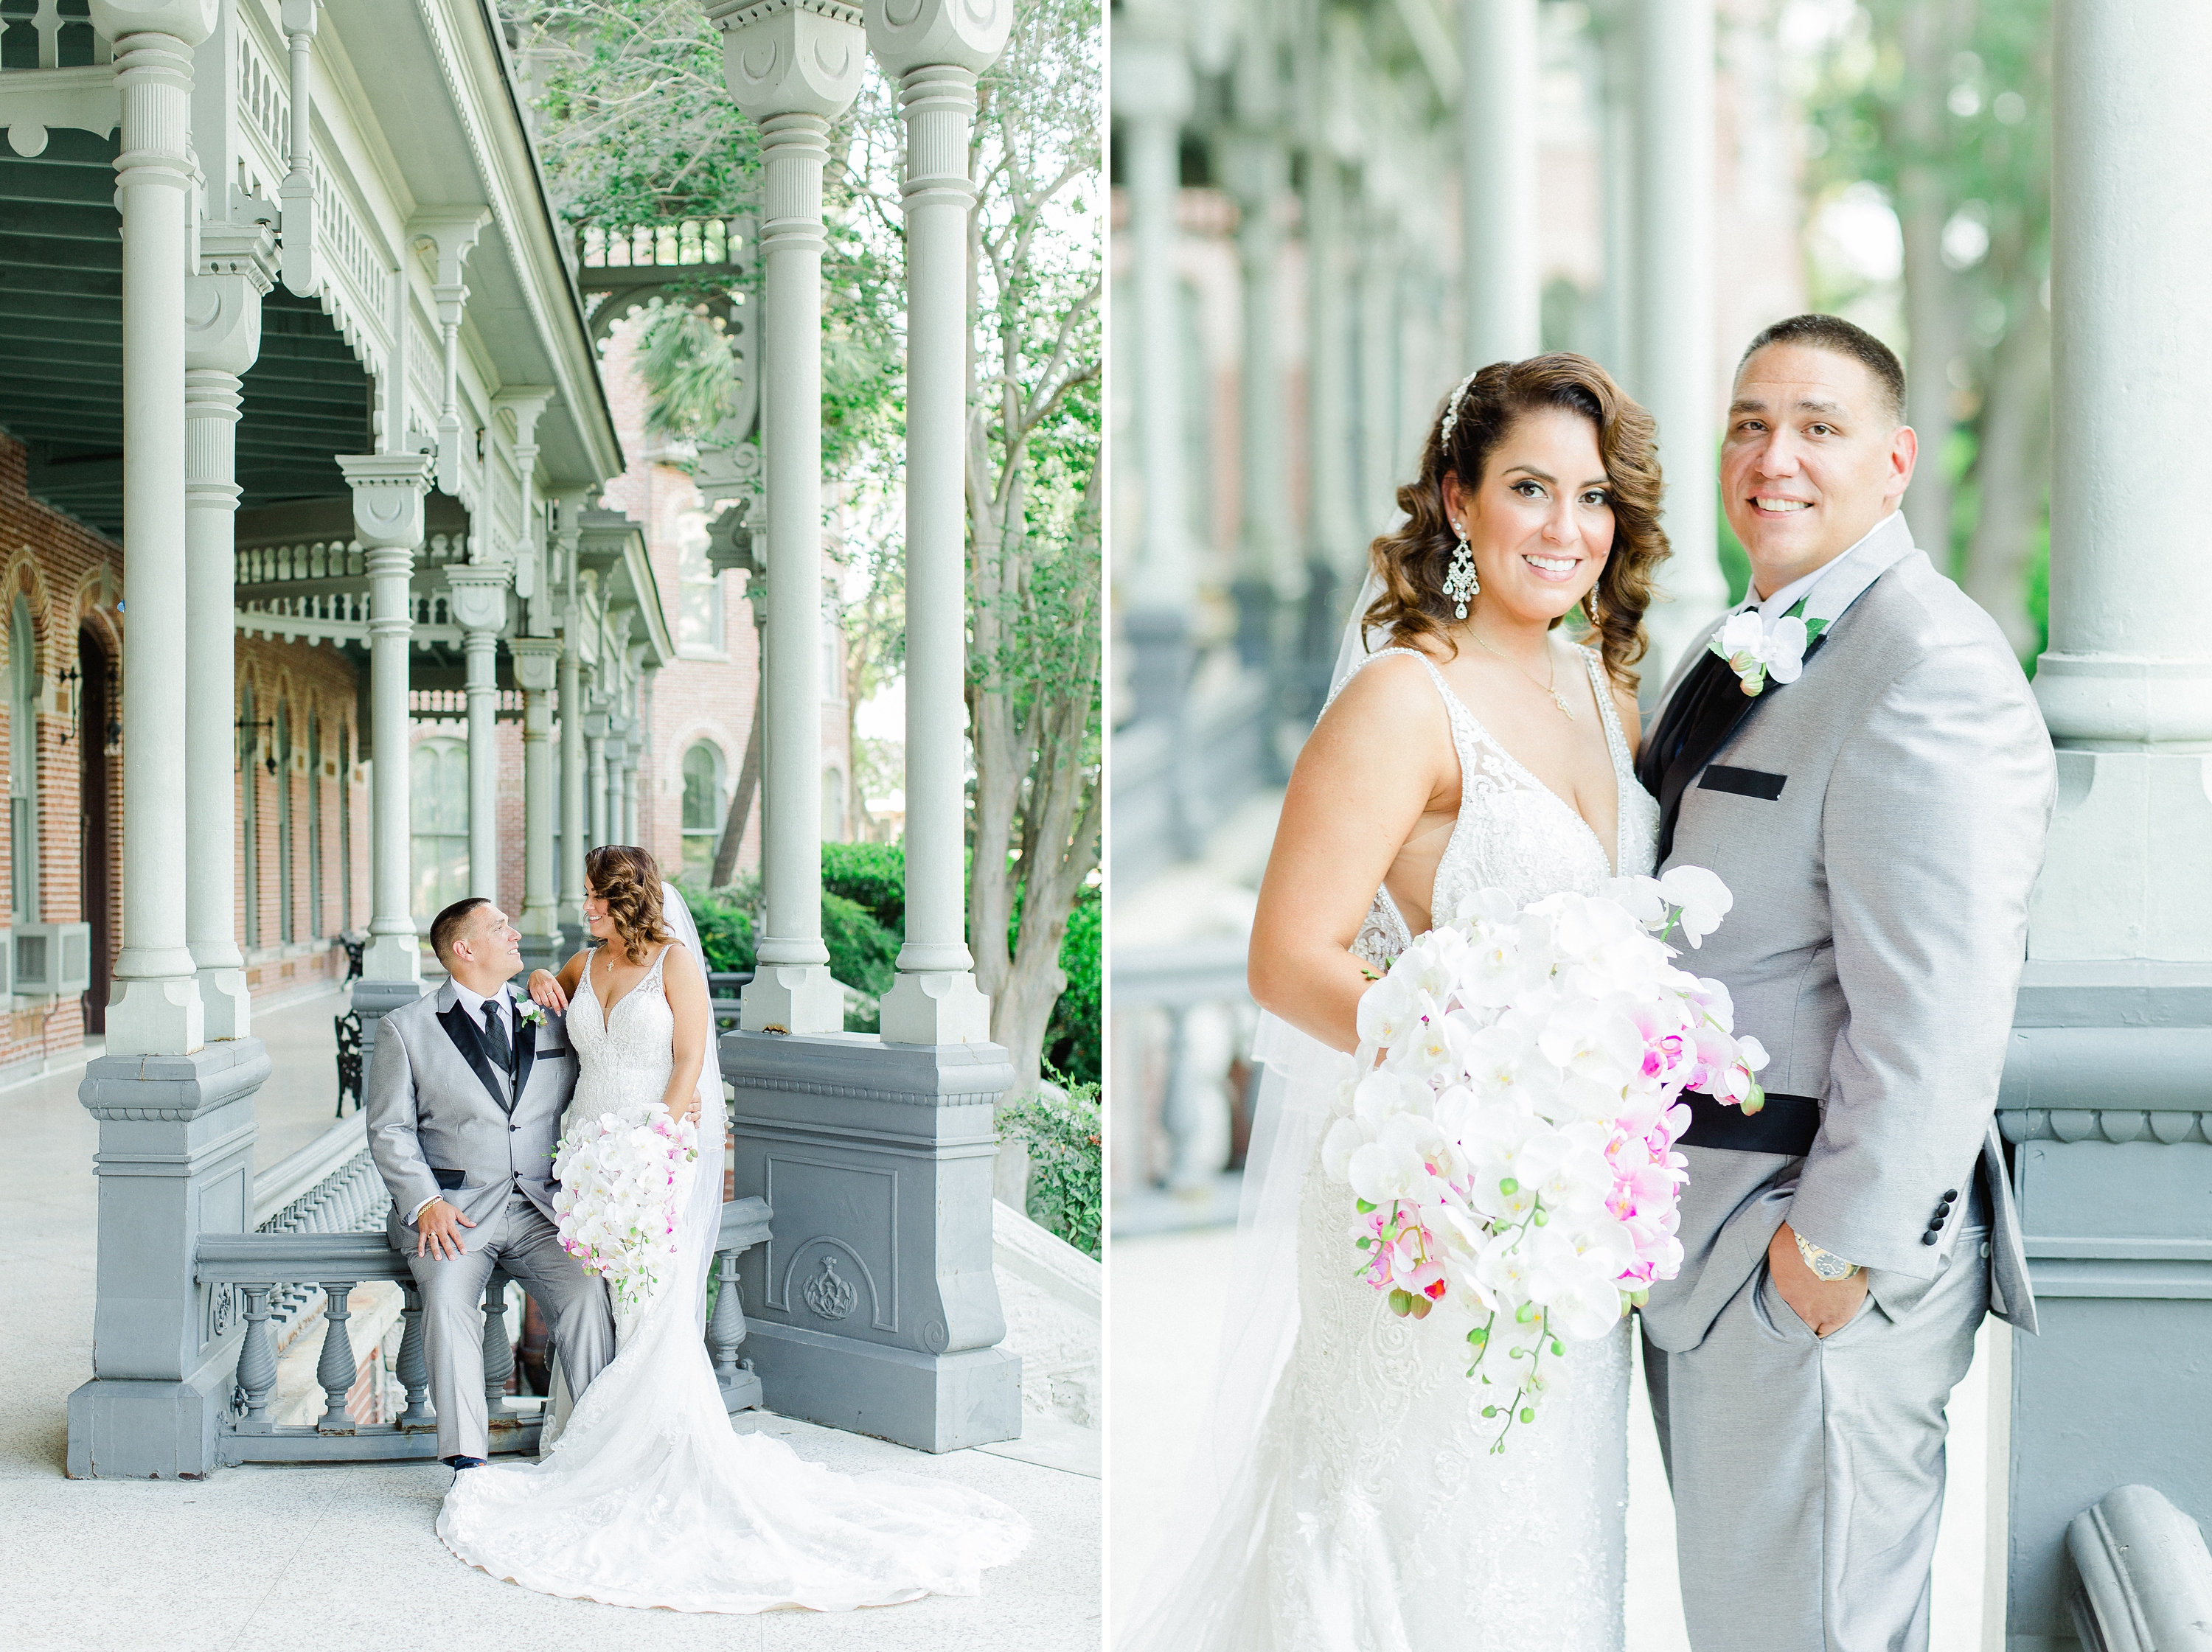 Tampa Wedding Photographer | © Ailyn La Torre Photography 2019